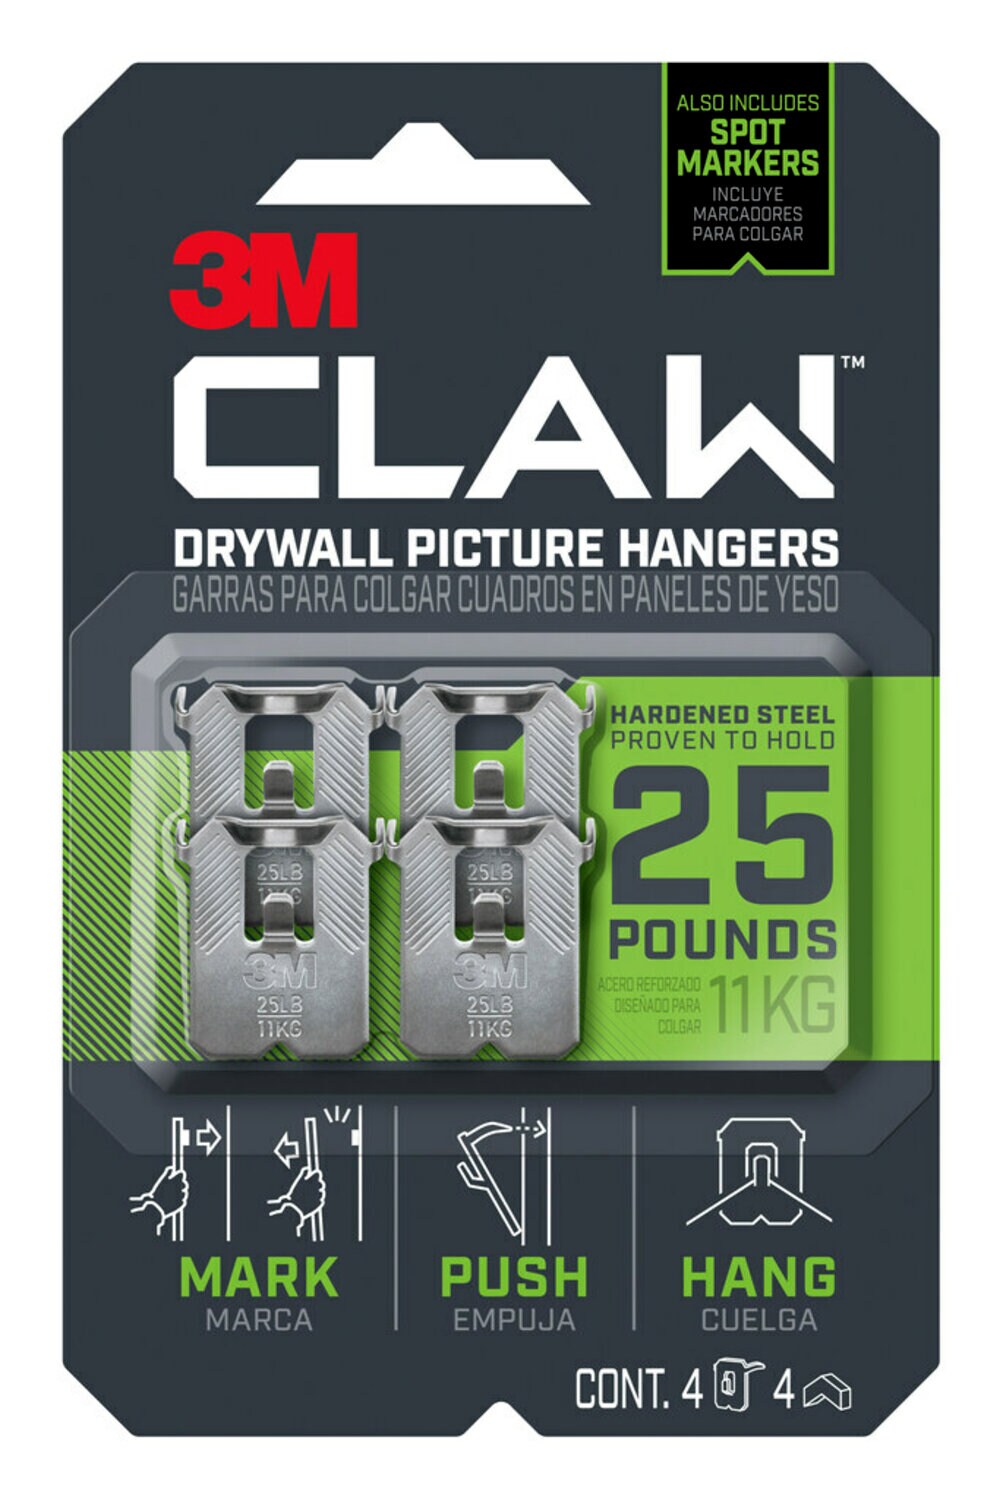 7100227273 - 3M CLAW Drywall Picture Hanger 25 lb with Temporary Spot Marker 3PH25M-4EF, 4 hangers, 4 markers